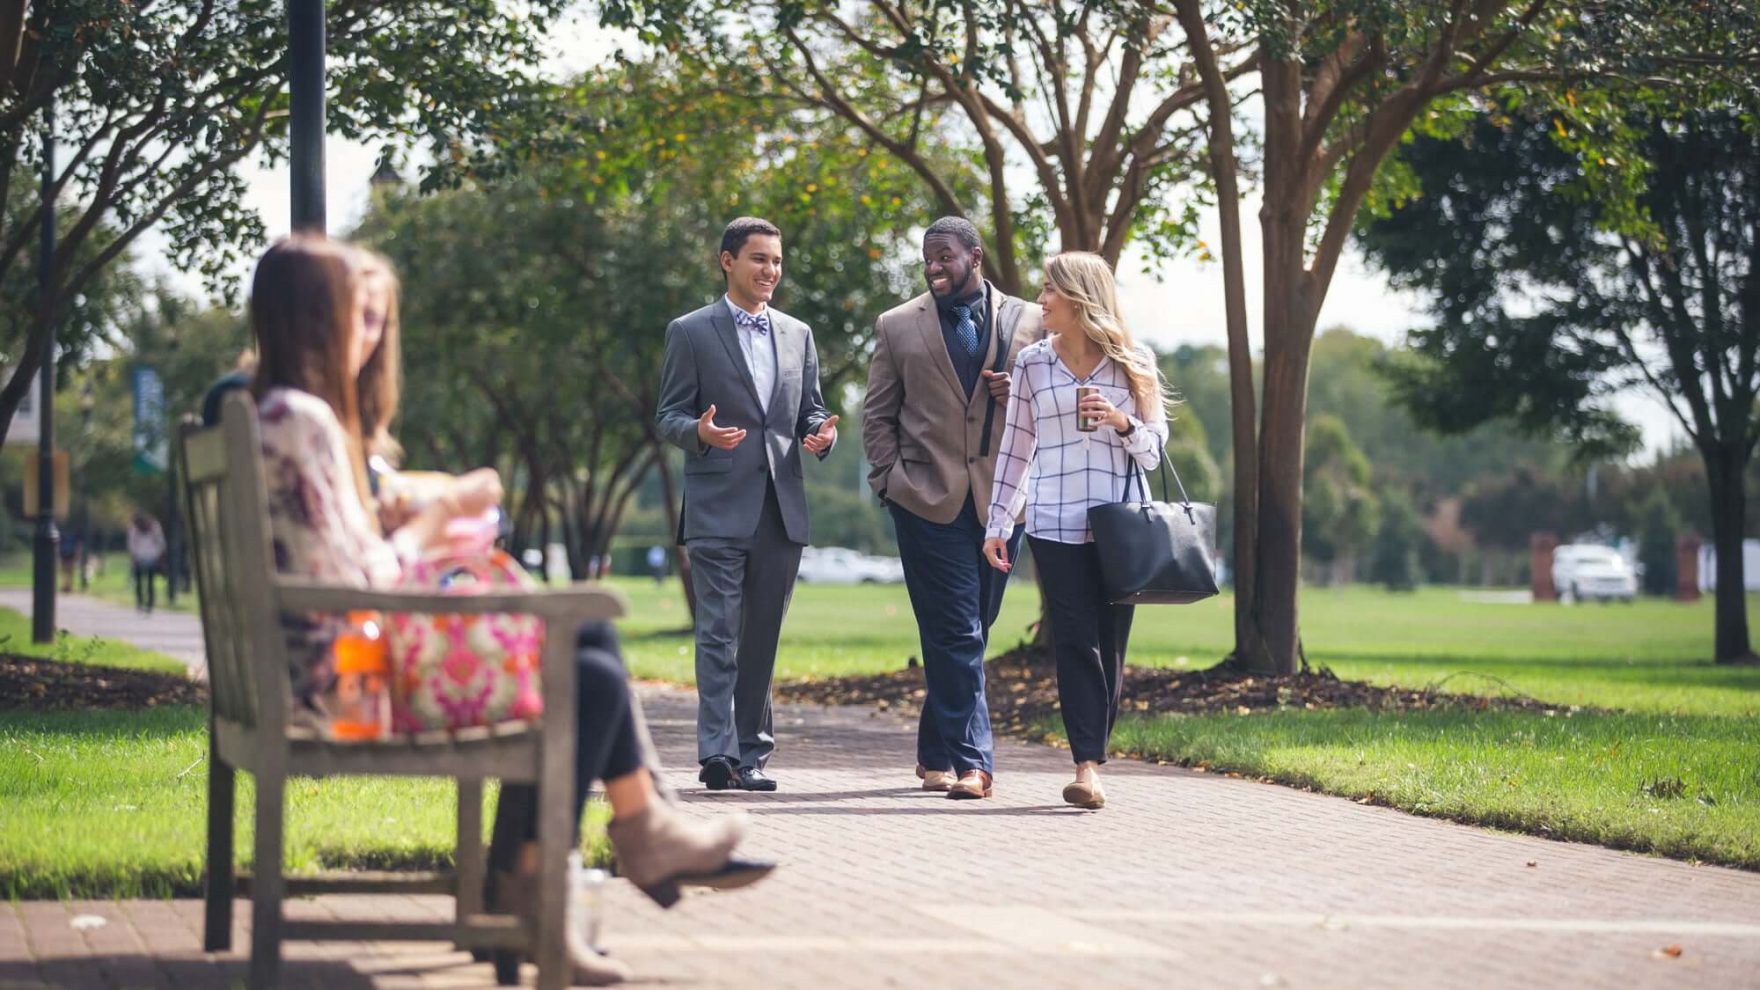 Students walking on campus: Exploring the reasons to attend Regent University.